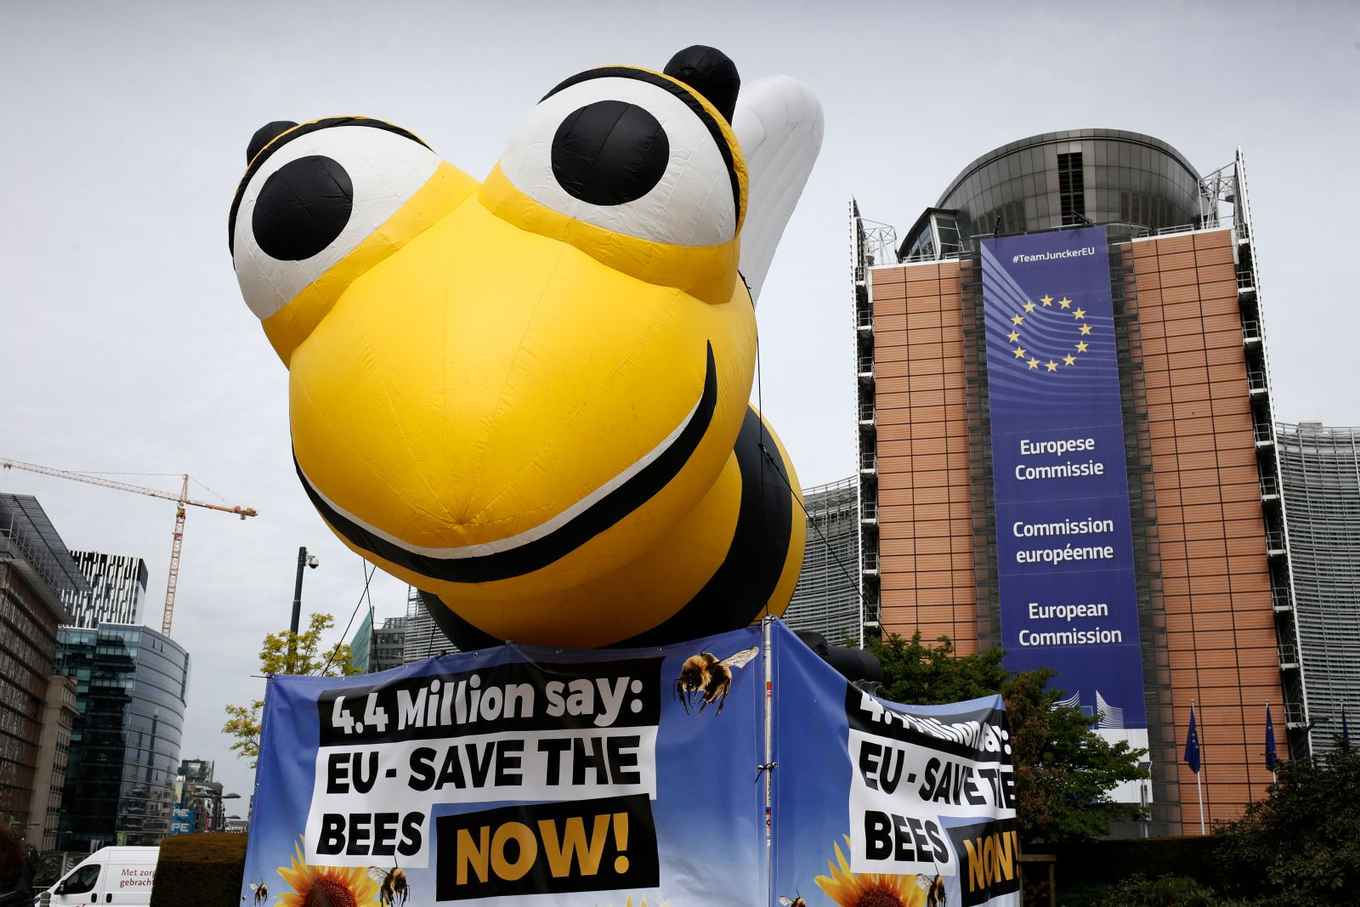 A giant inflated model of a bee during a demonstration in front of the EU Commission offices calling the EU to adopt a ban on bee-killing neonicotinoid pesticides